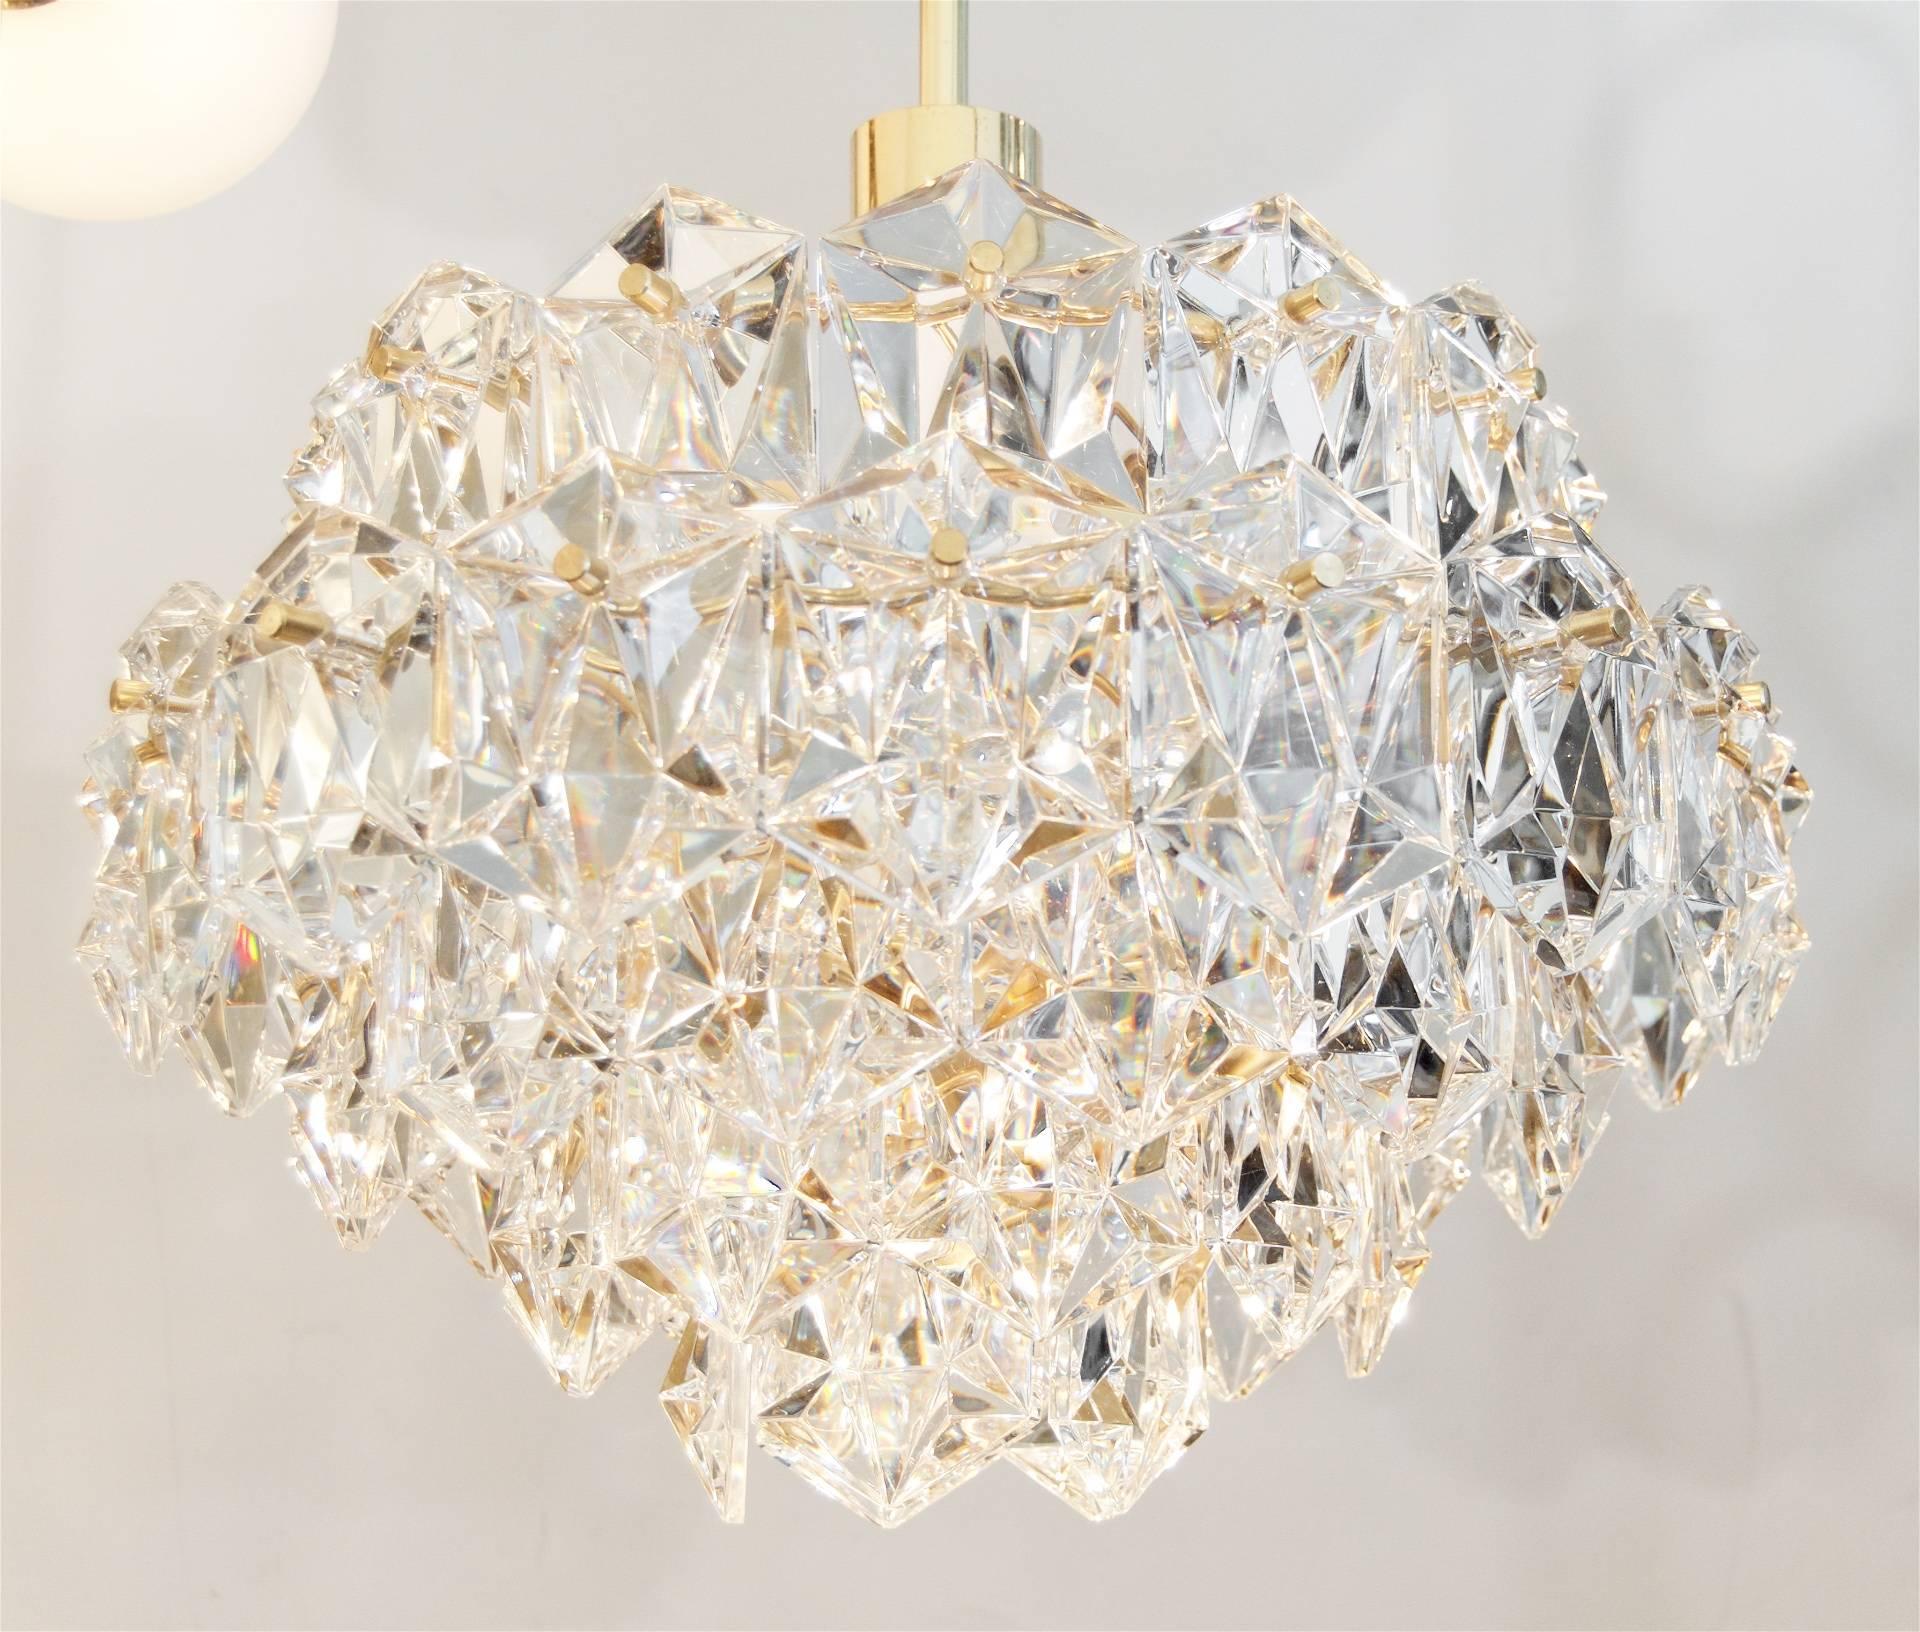 Elegant five-tier brass chandelier with elongated hexagonal crystals made by OTT International.

Takes 12 E-14 base bulbs up to 40 watts per bulb and one medium base bulb up 75 watts.

Height listed is of chandelier body only, current overall